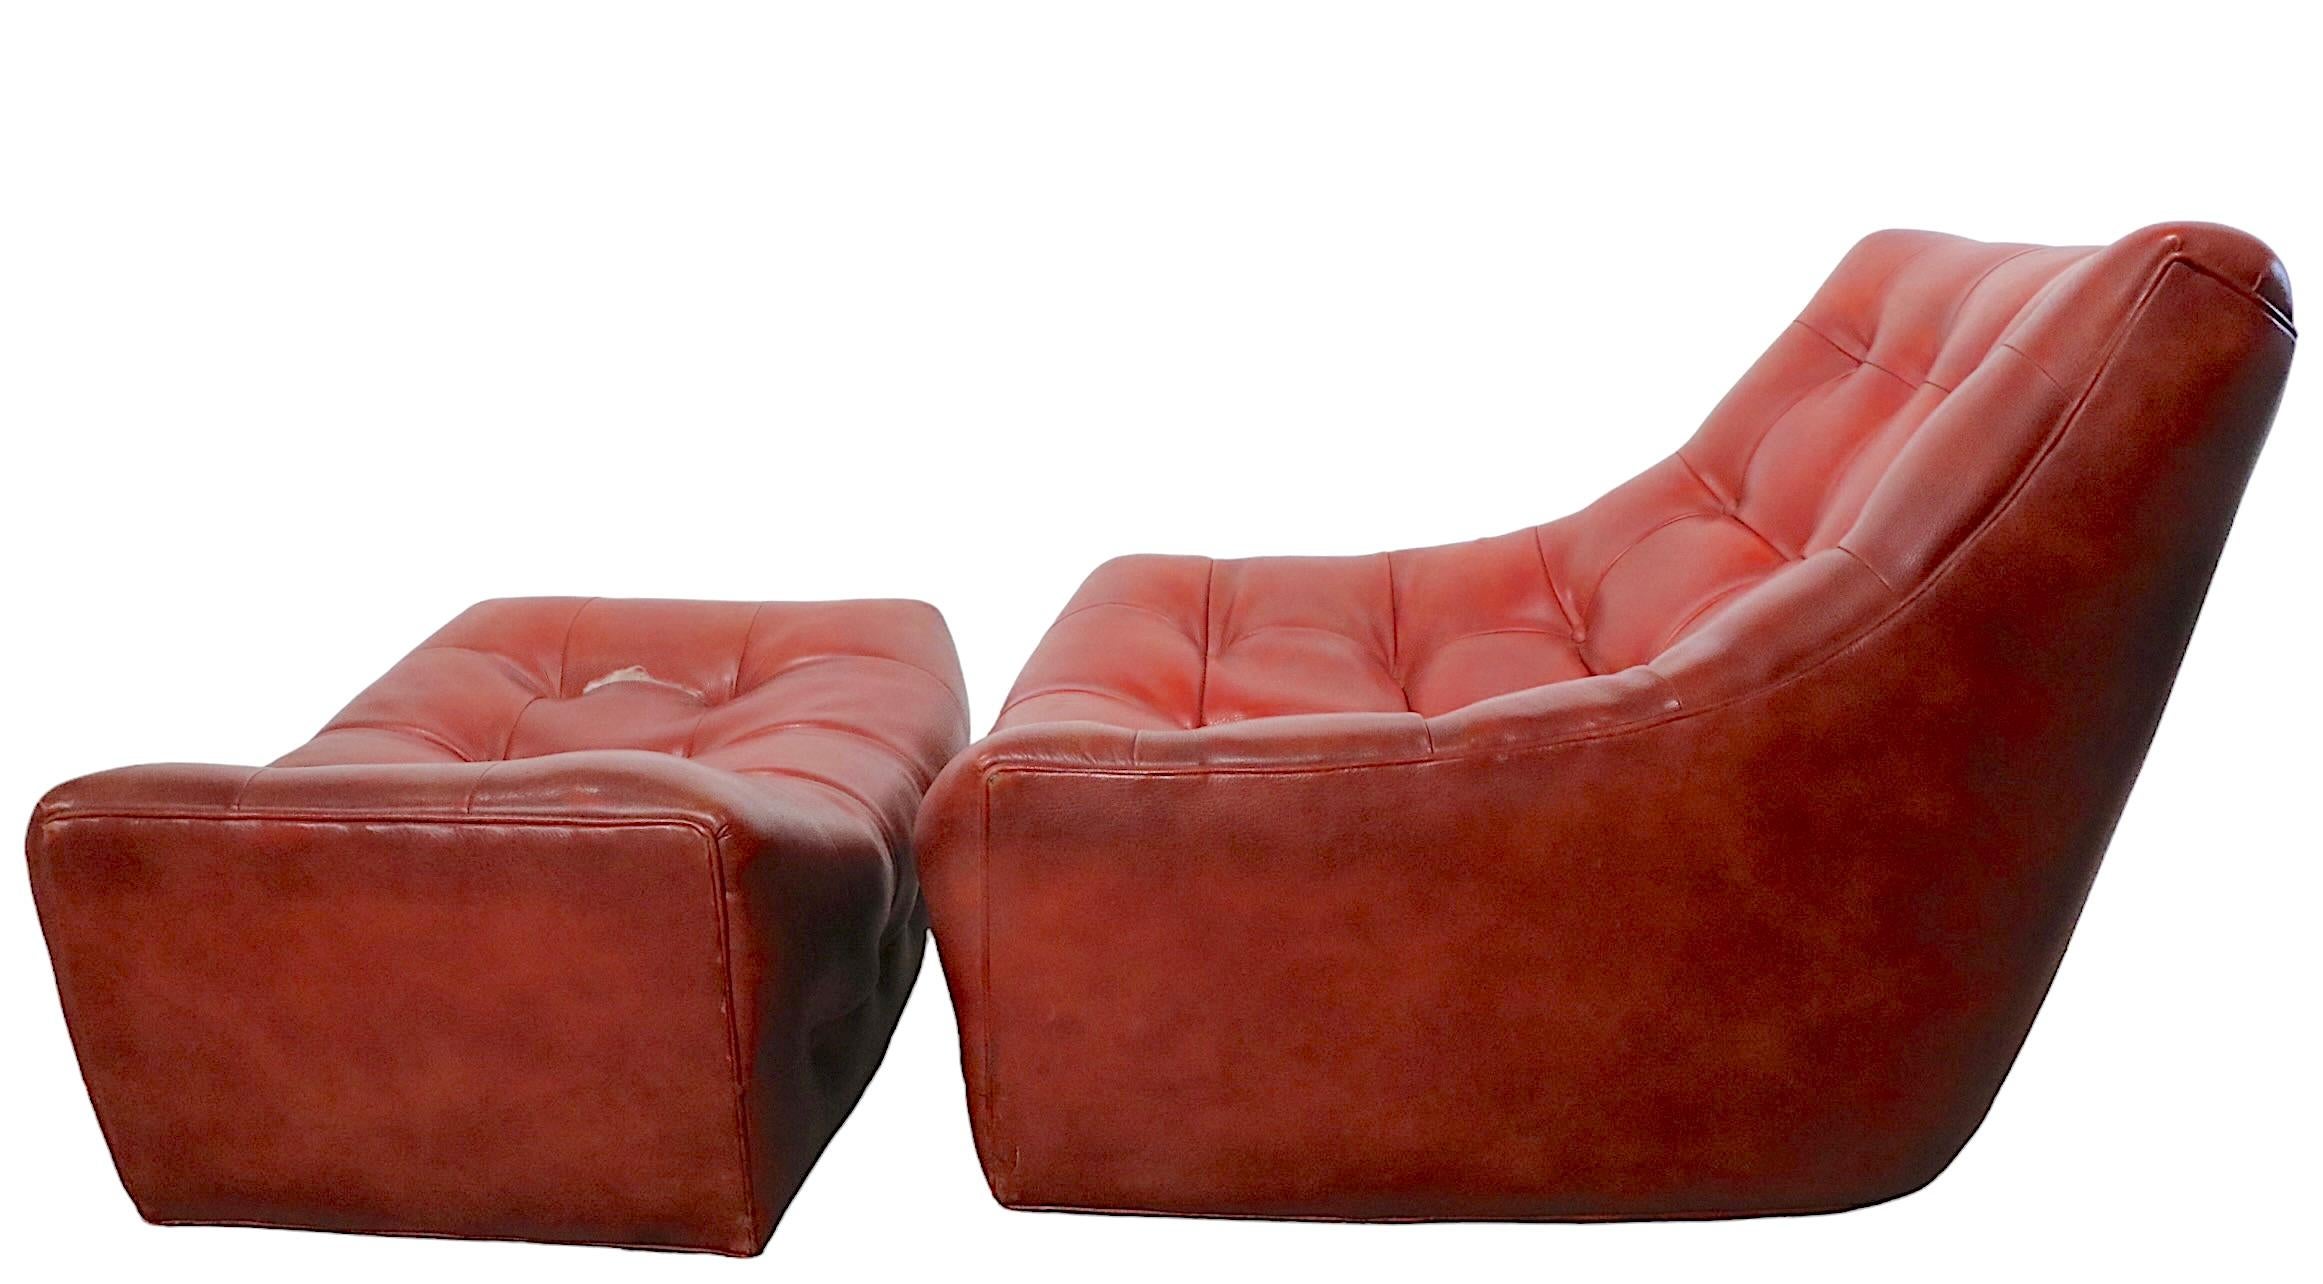 Lounge Chair and Ottoman by Milo Baughman for Thayer Coggin circa 1970s For Sale 6